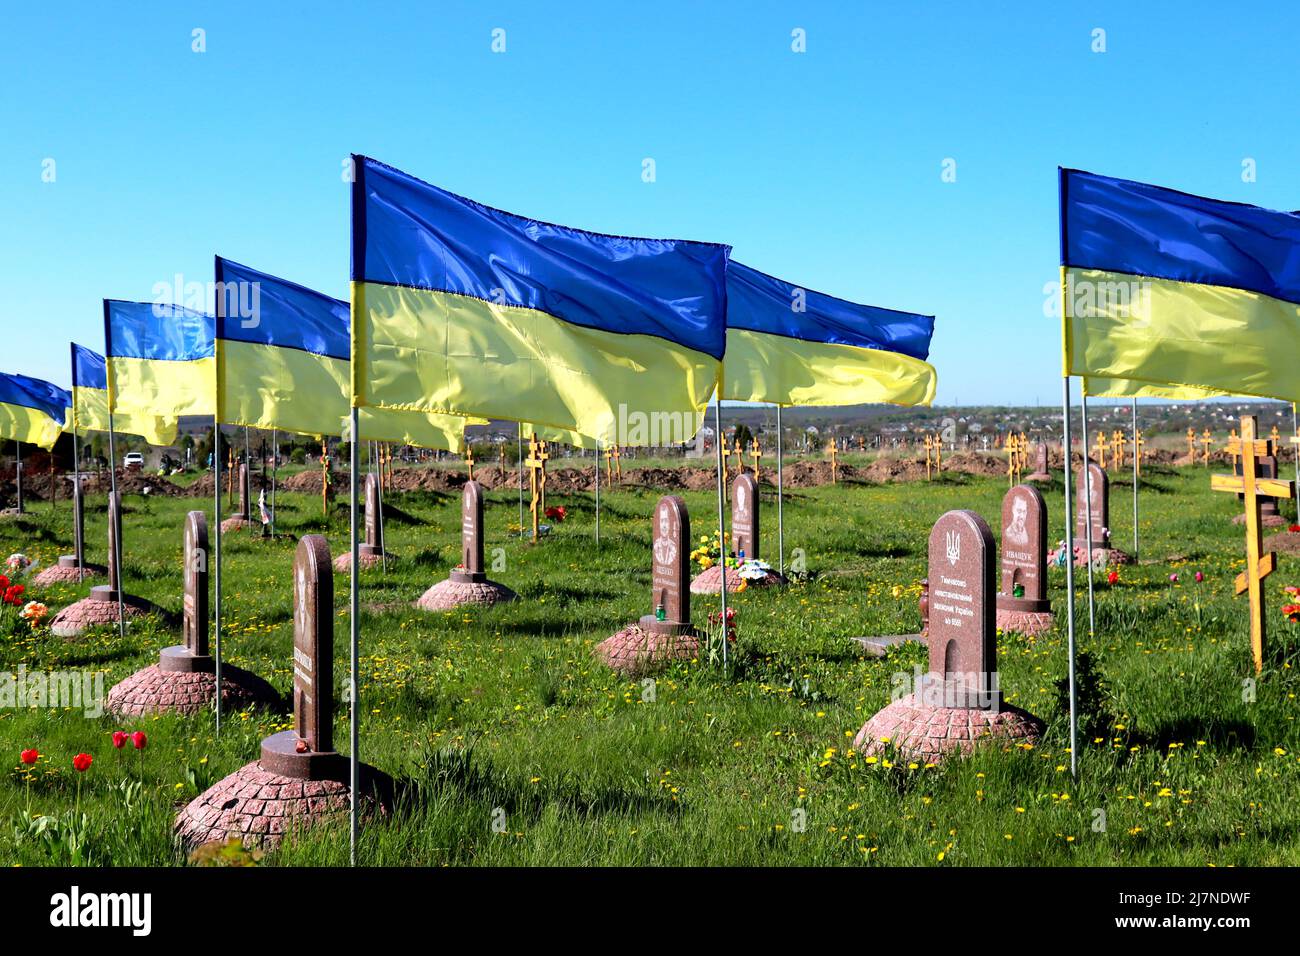 military-cemetery-where-soldiers-who-died-in-russian-war-against-ukraine-are-buried-state-ukrainian-flag-flutter-over-graves-and-monuments-dnipro-ci-2J7NDWF.jpg